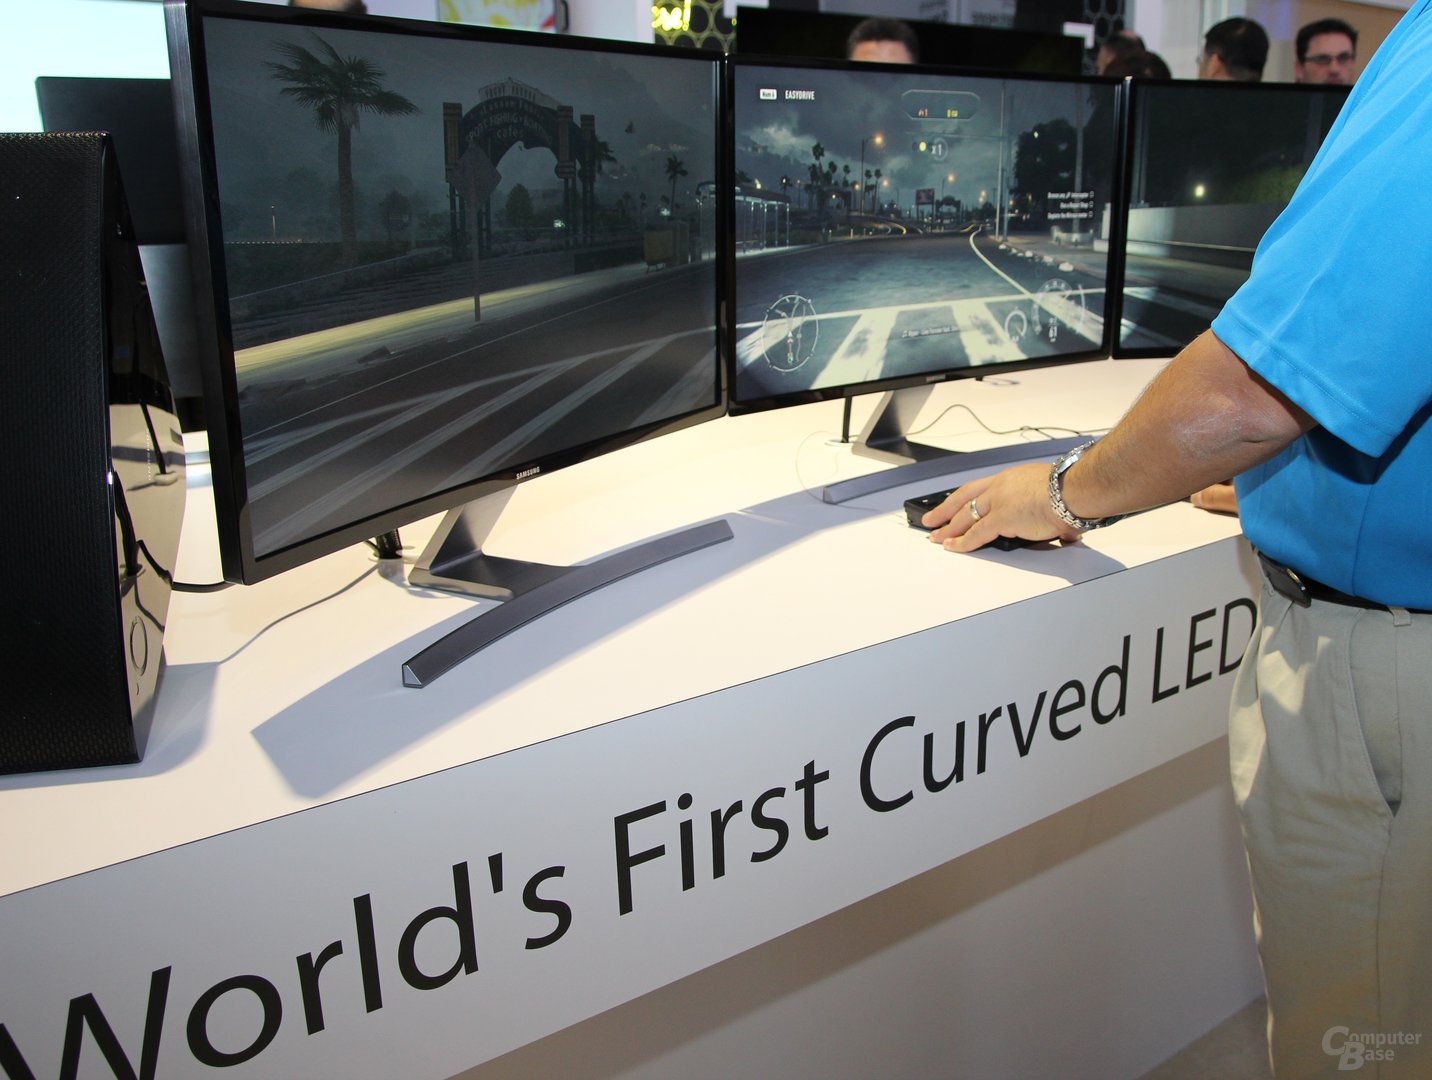 Samsung zeigt „World's First Curved LED-Monitor“